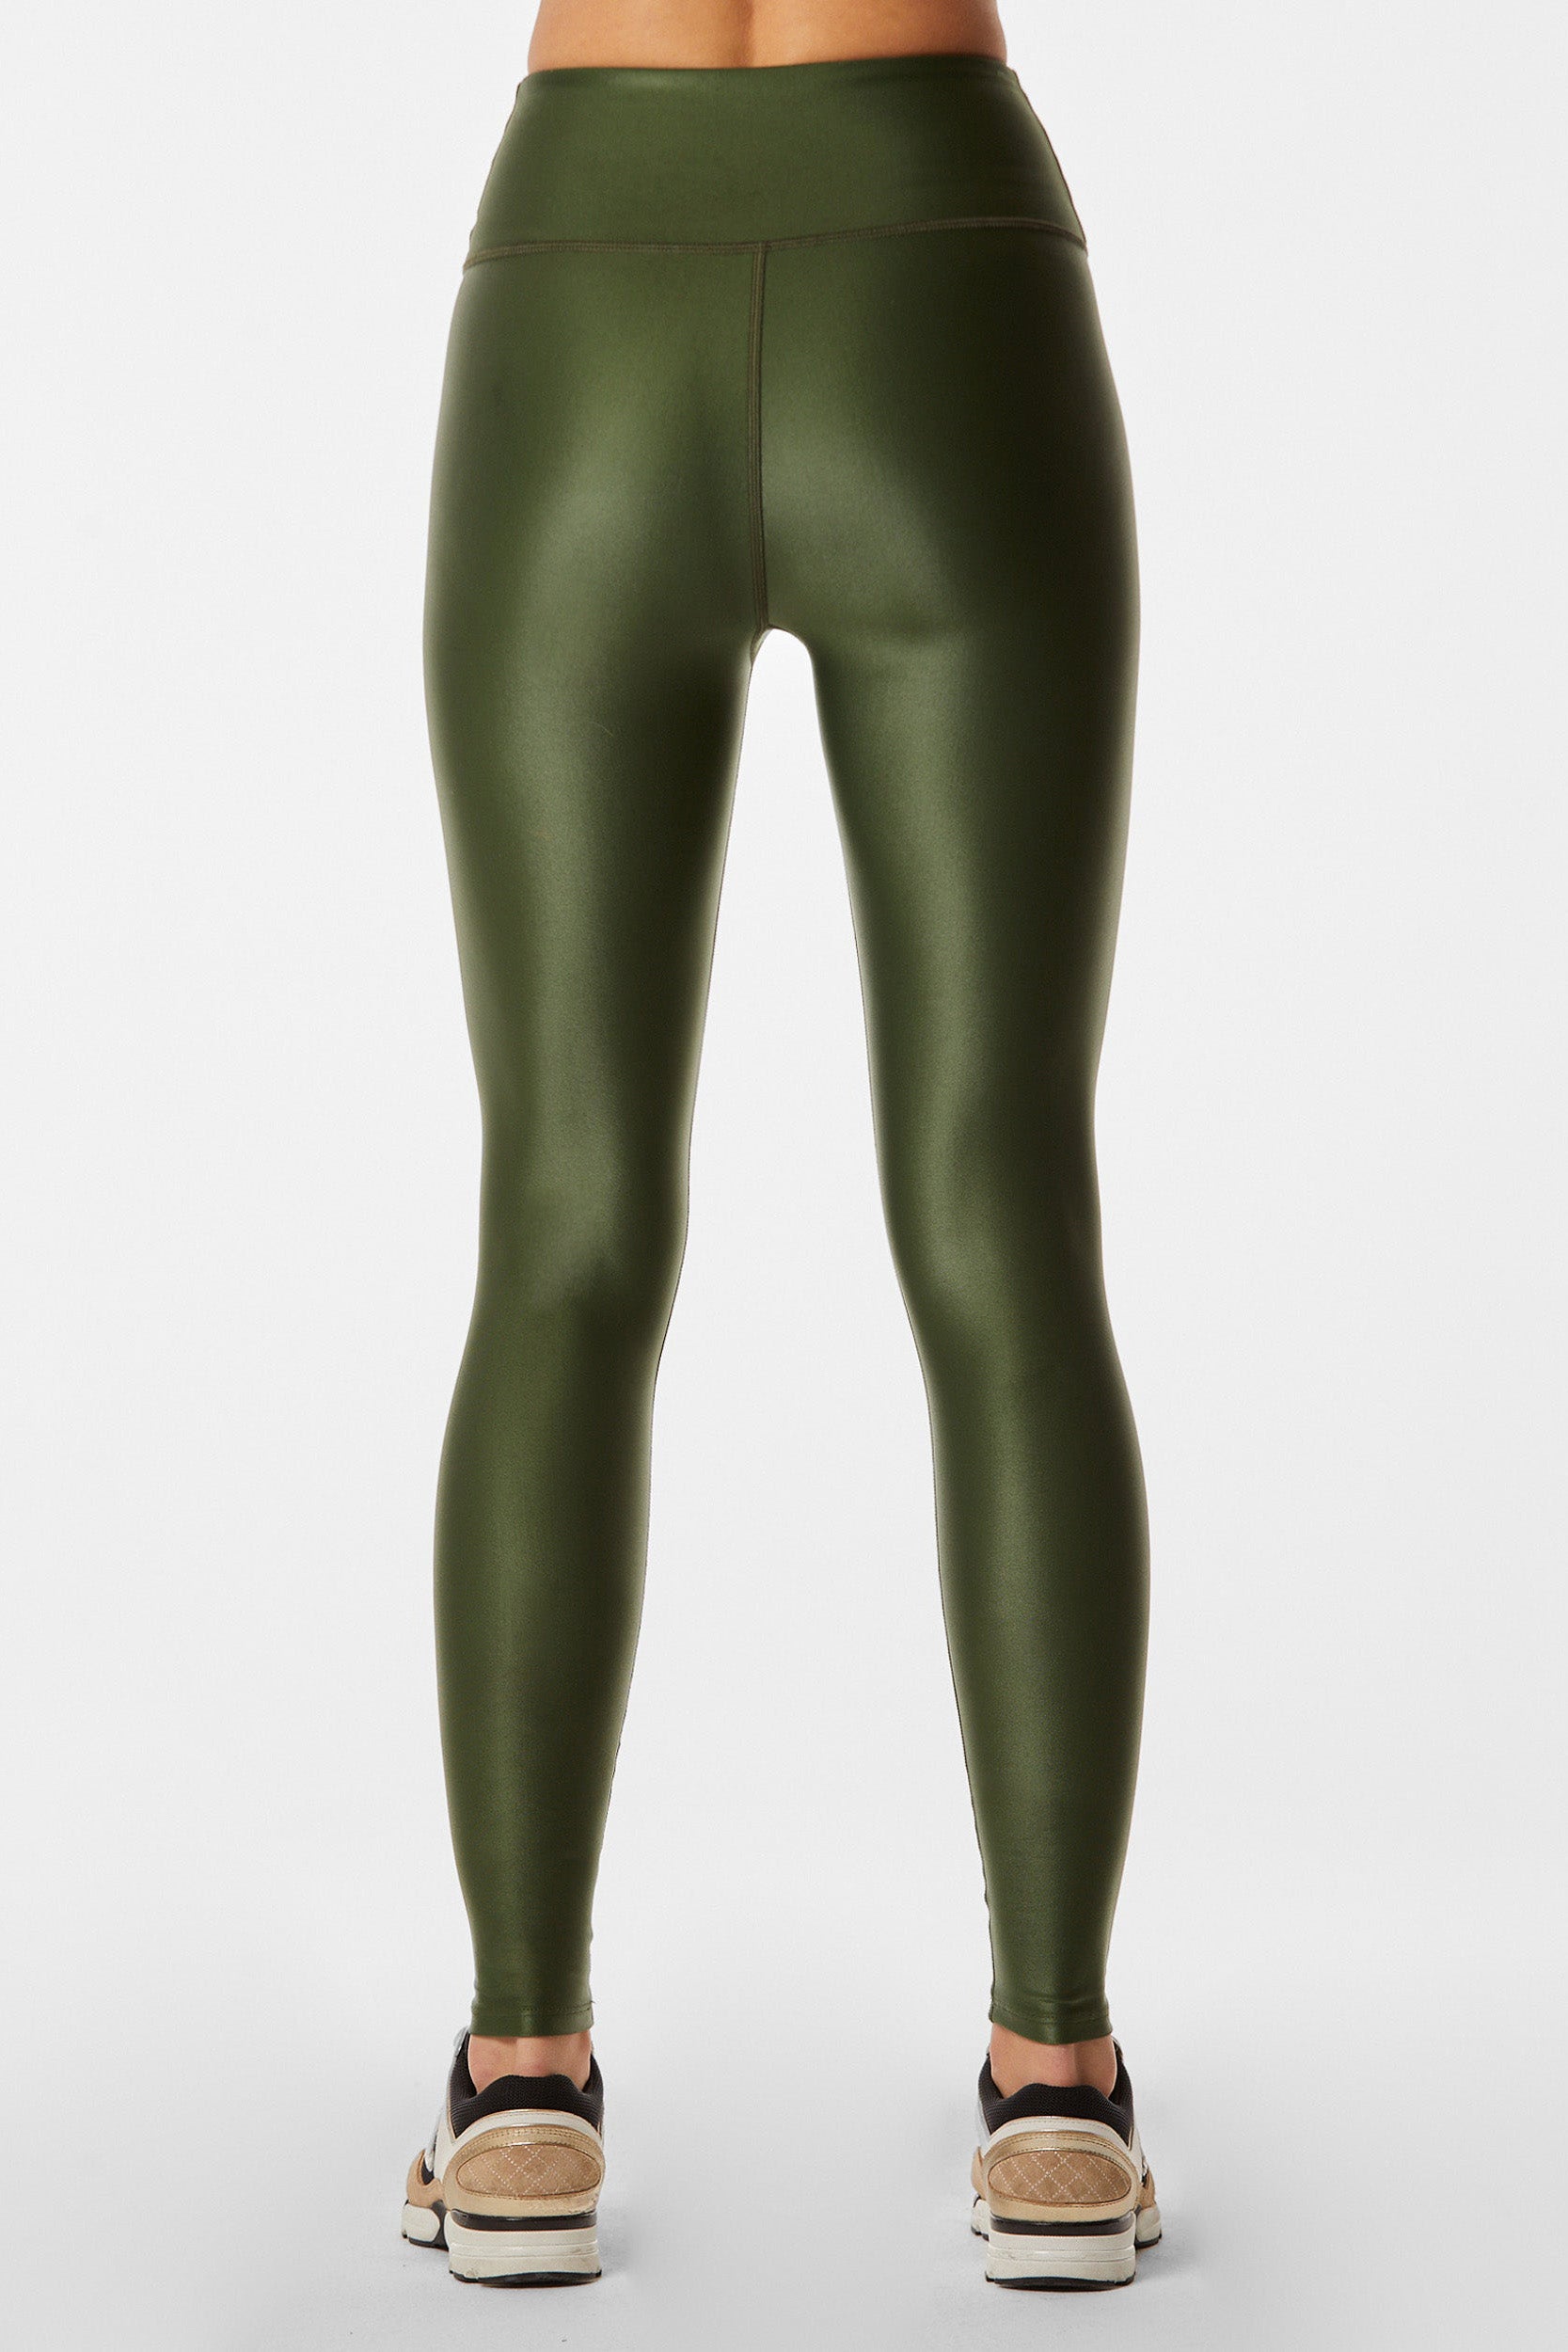 Back view of a person wearing the Liquid Legging - Hunter, high-waisted and squat-proof with a shiny dark green finish, paired with white sneakers featuring black and beige details. The background is plain white.